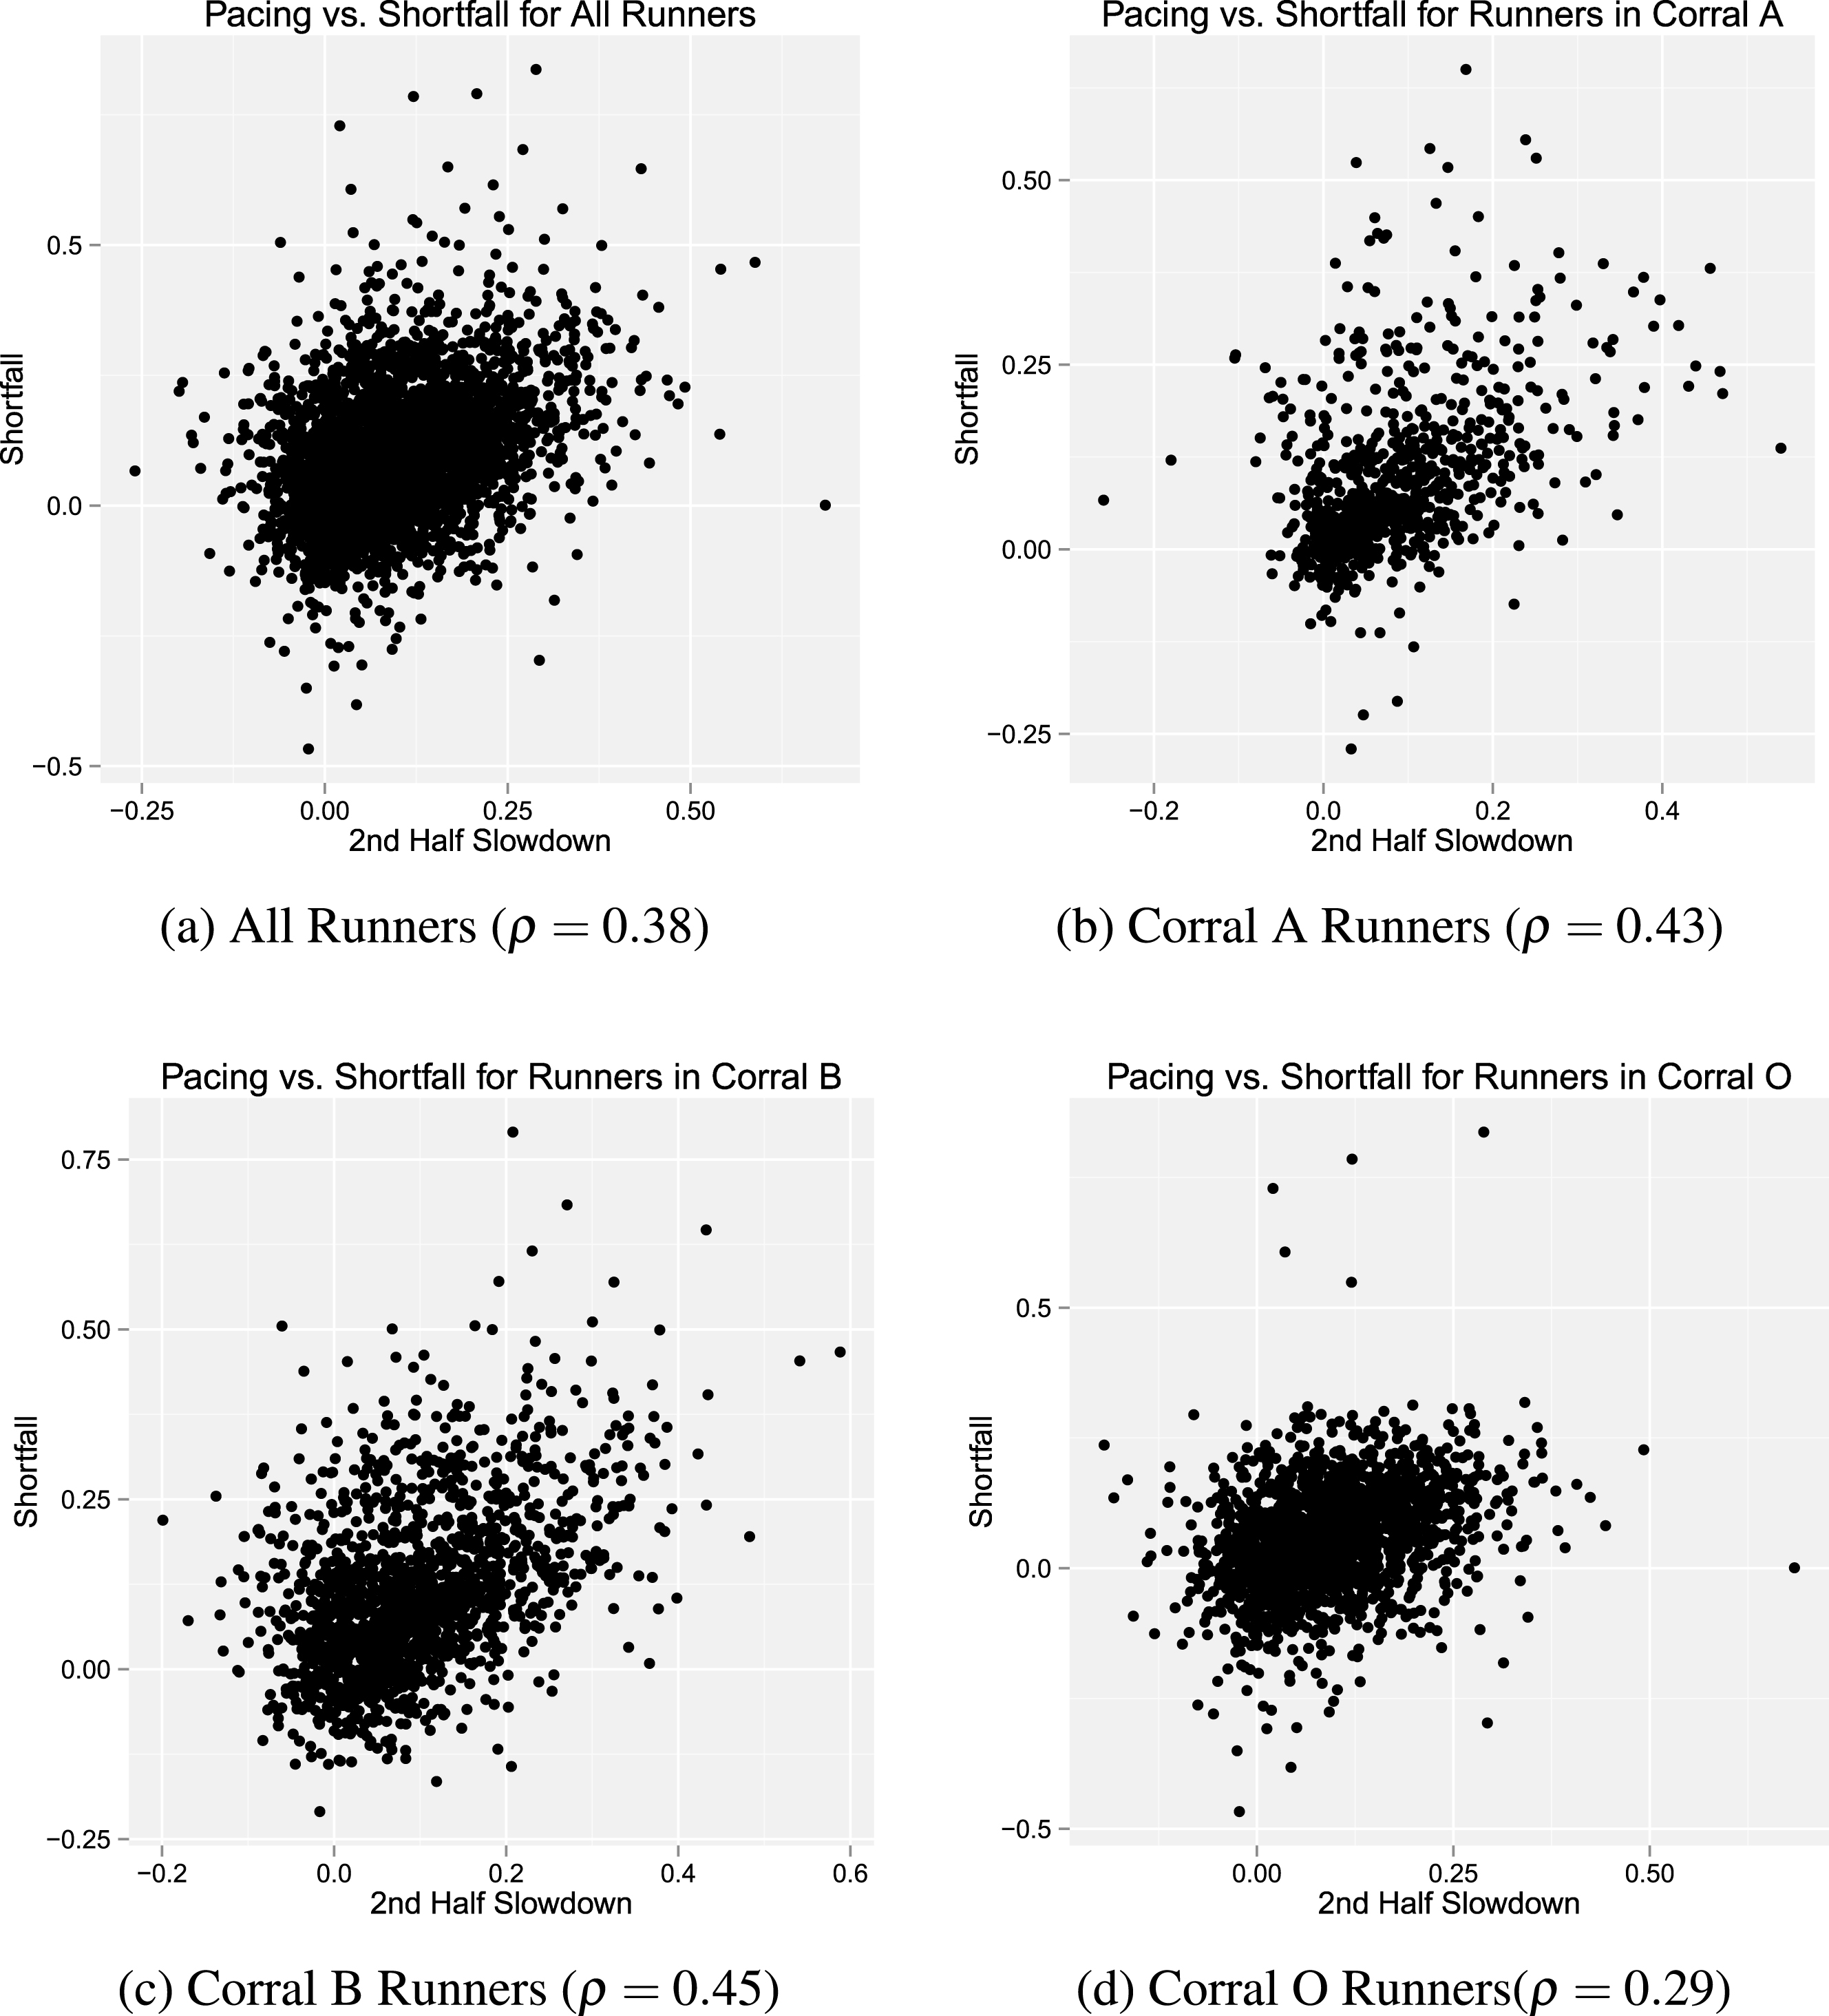 Scatterplot of the relationship between 2nd half slowdown and shortfall
for all runners and runners by corral. We find a statistically significant correlation
(p <0.01) between pacing and shortfall across all corrals.